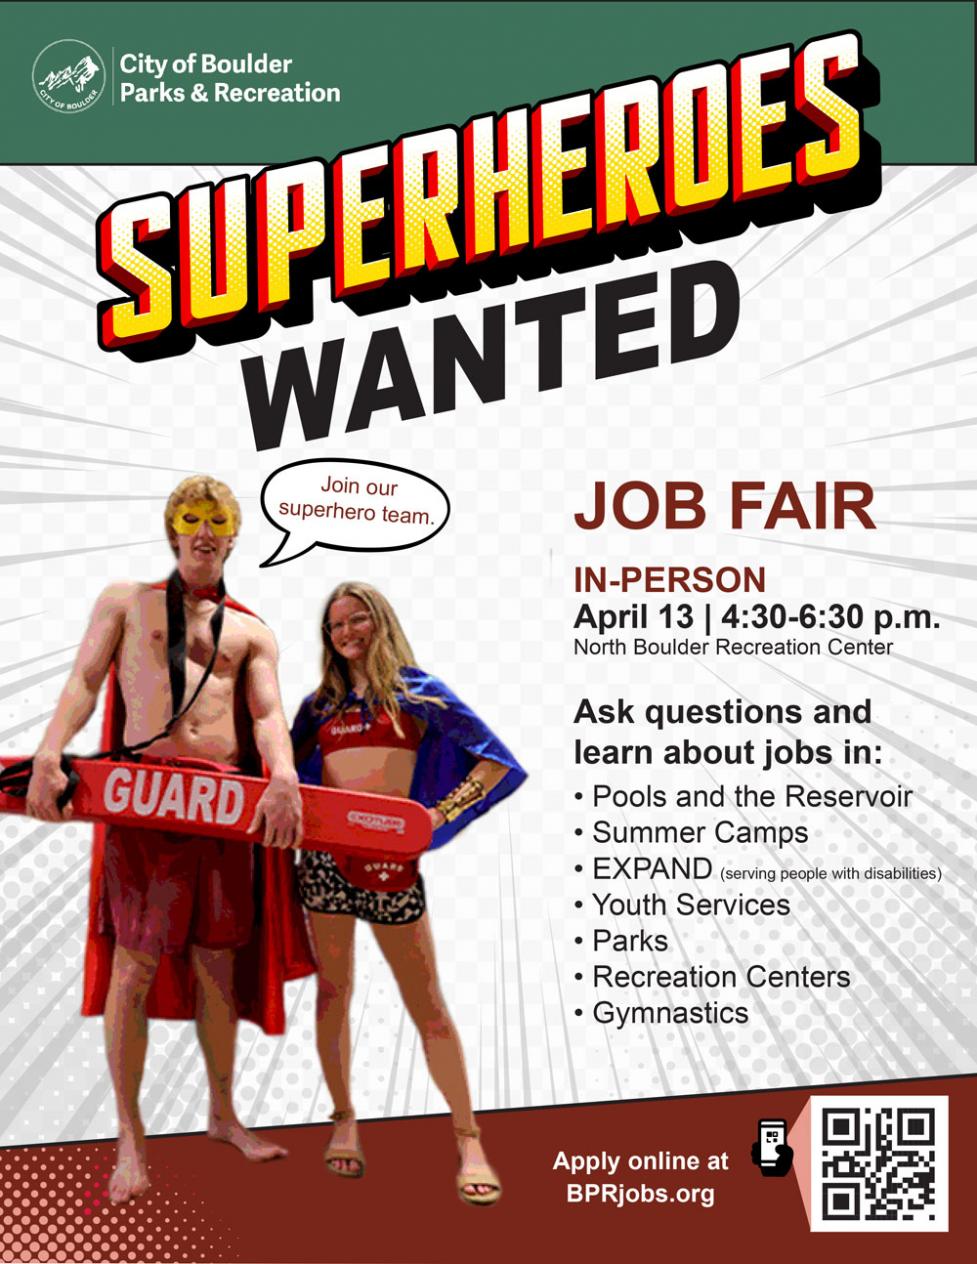 Parks and Recreation is hiring superheroes